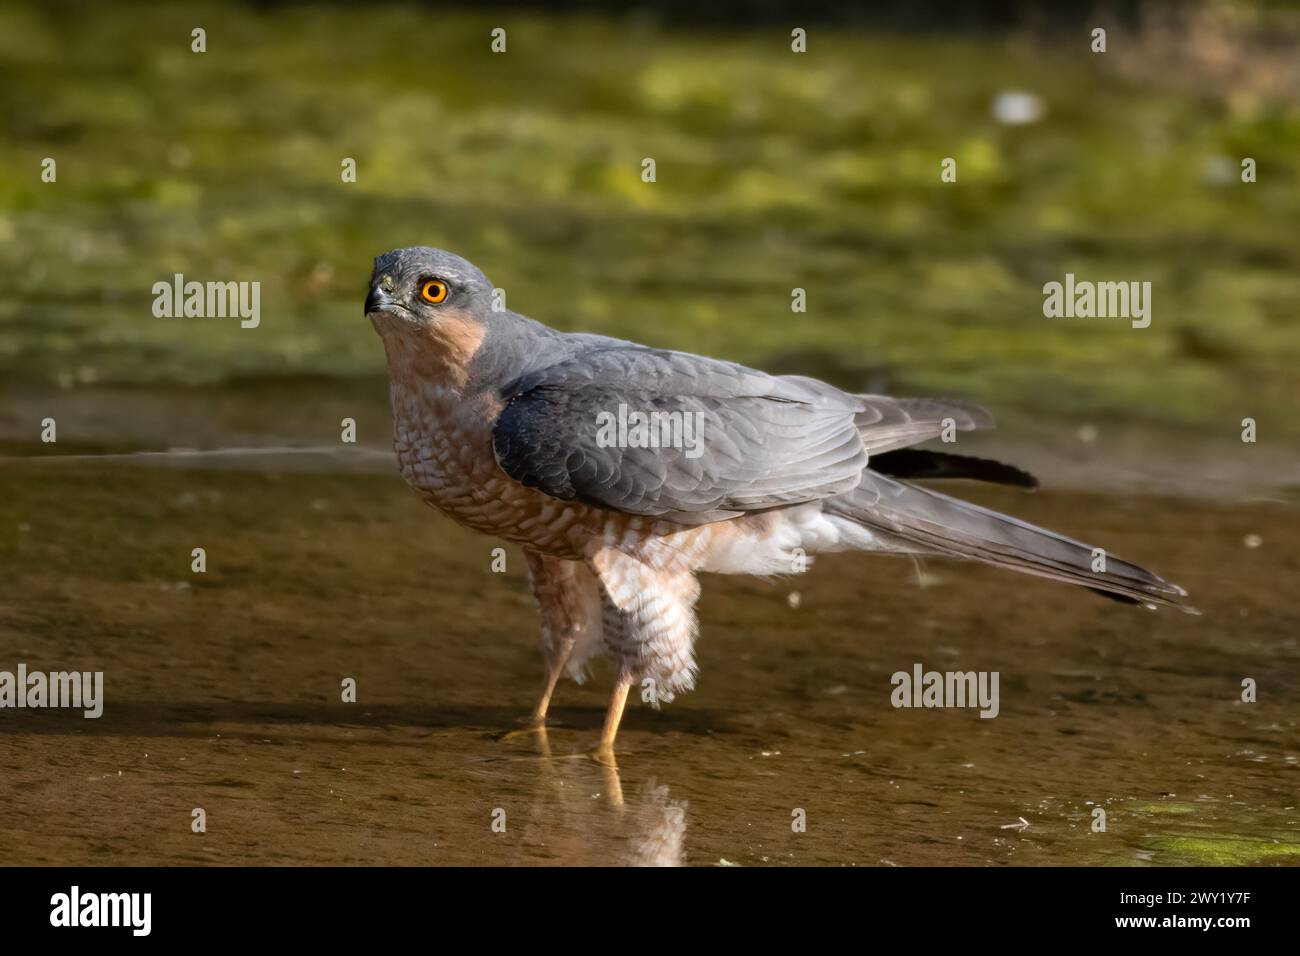 Eurasian sparrowhawk (Accipiter nisus), also known as the northern sparrowhawk or simply the sparrowhawk, observed in Jhalana Leopard Reserve in Rajas Stock Photo